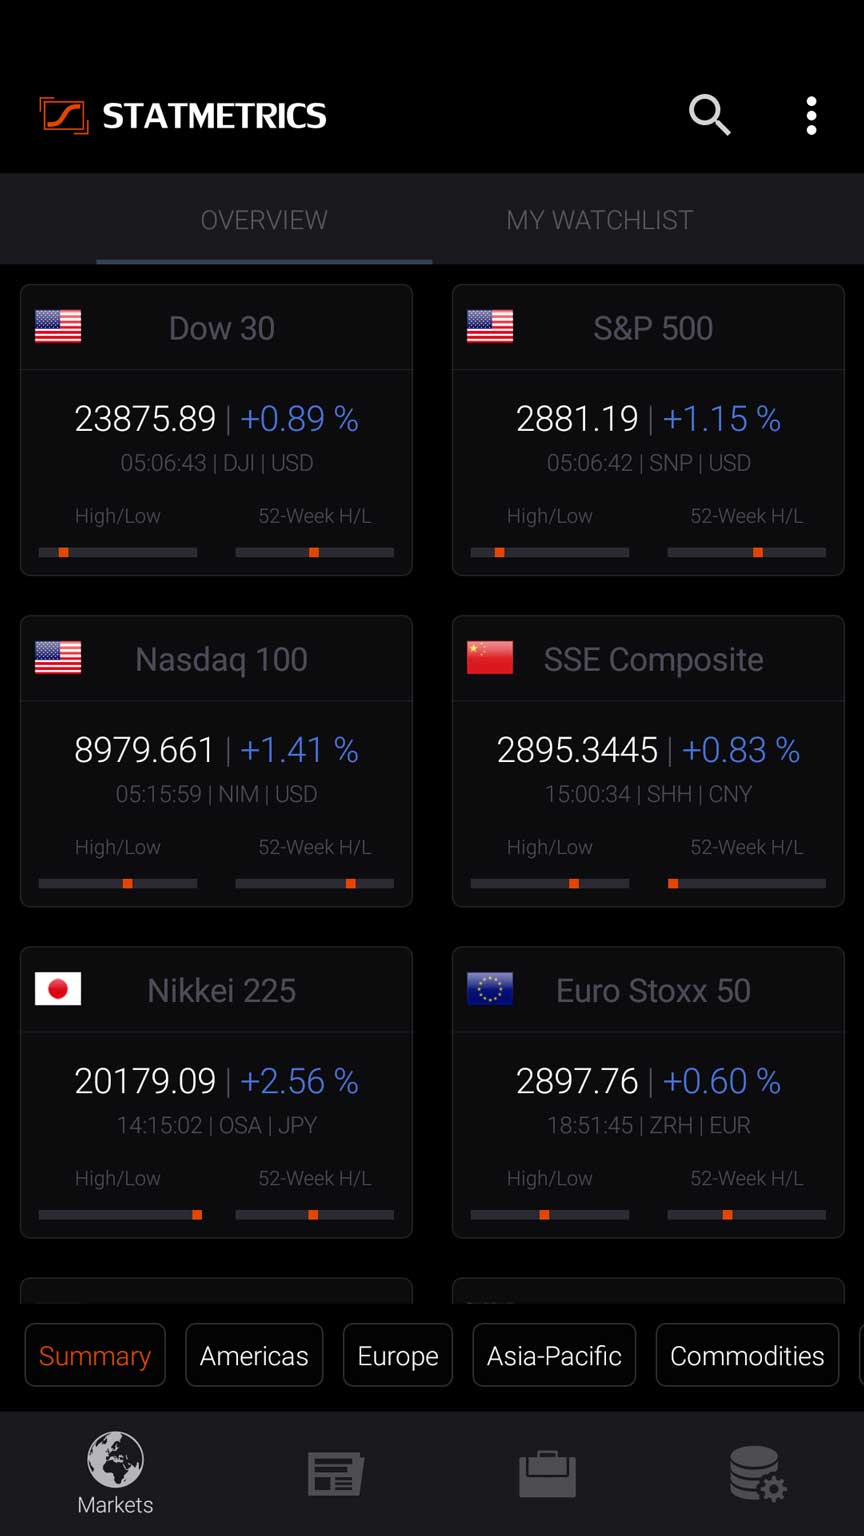 Global Markets Overview